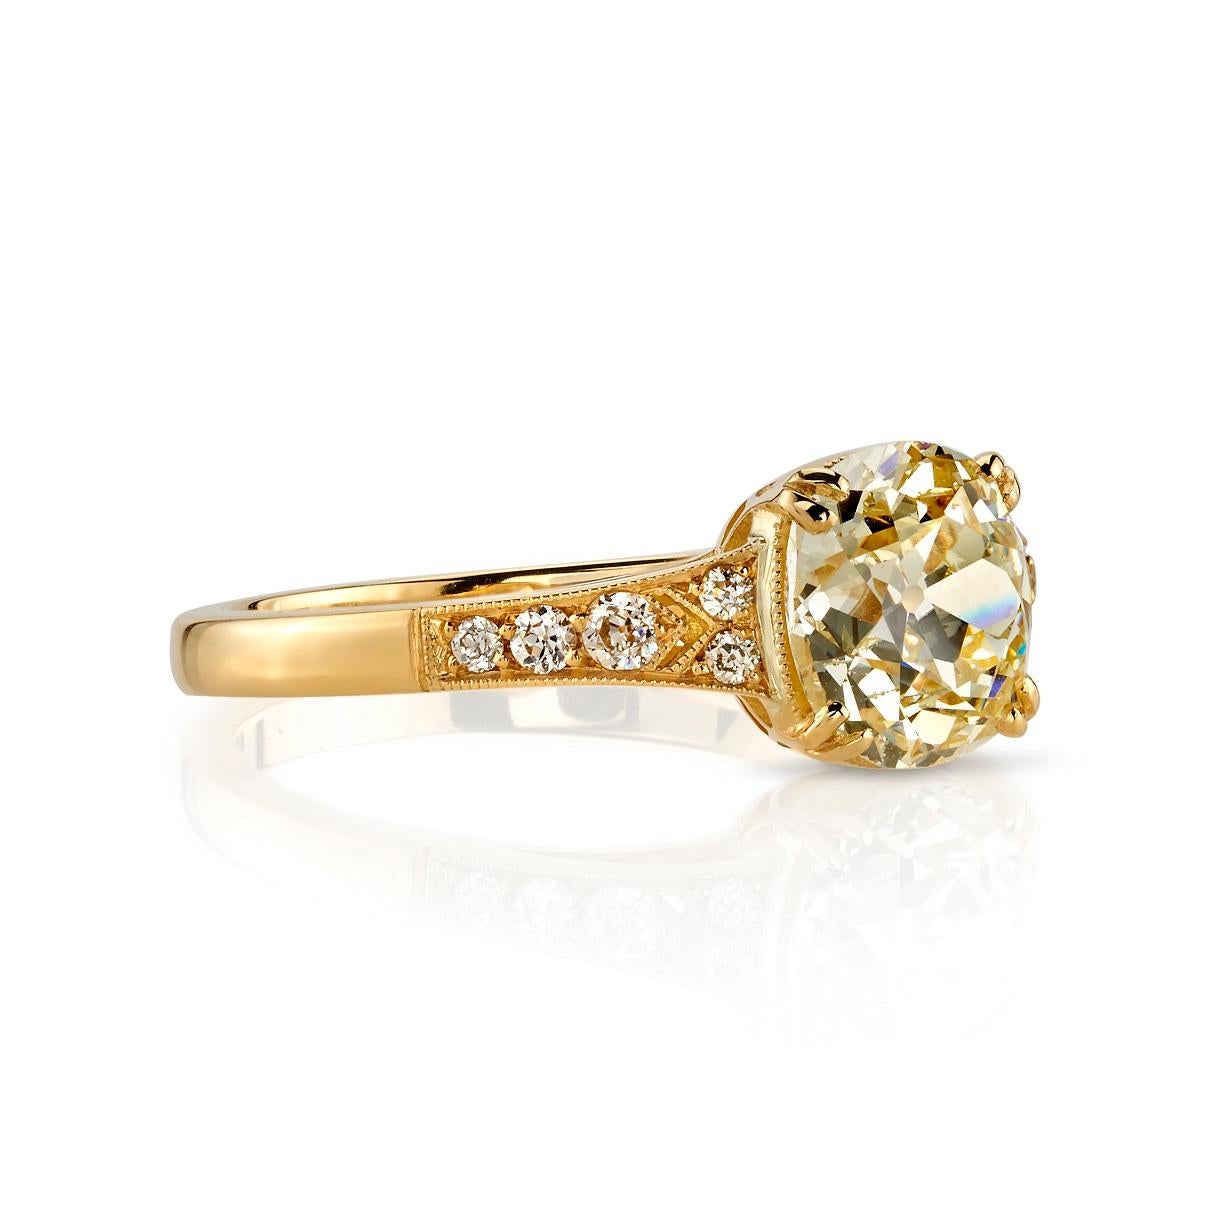 1.53ct OP/SI2 GIA certified vintage Cushion cut diamond set in a handcrafted 18k yellow gold mounting. Ring is currently a size 6 and can be sized to fit. 